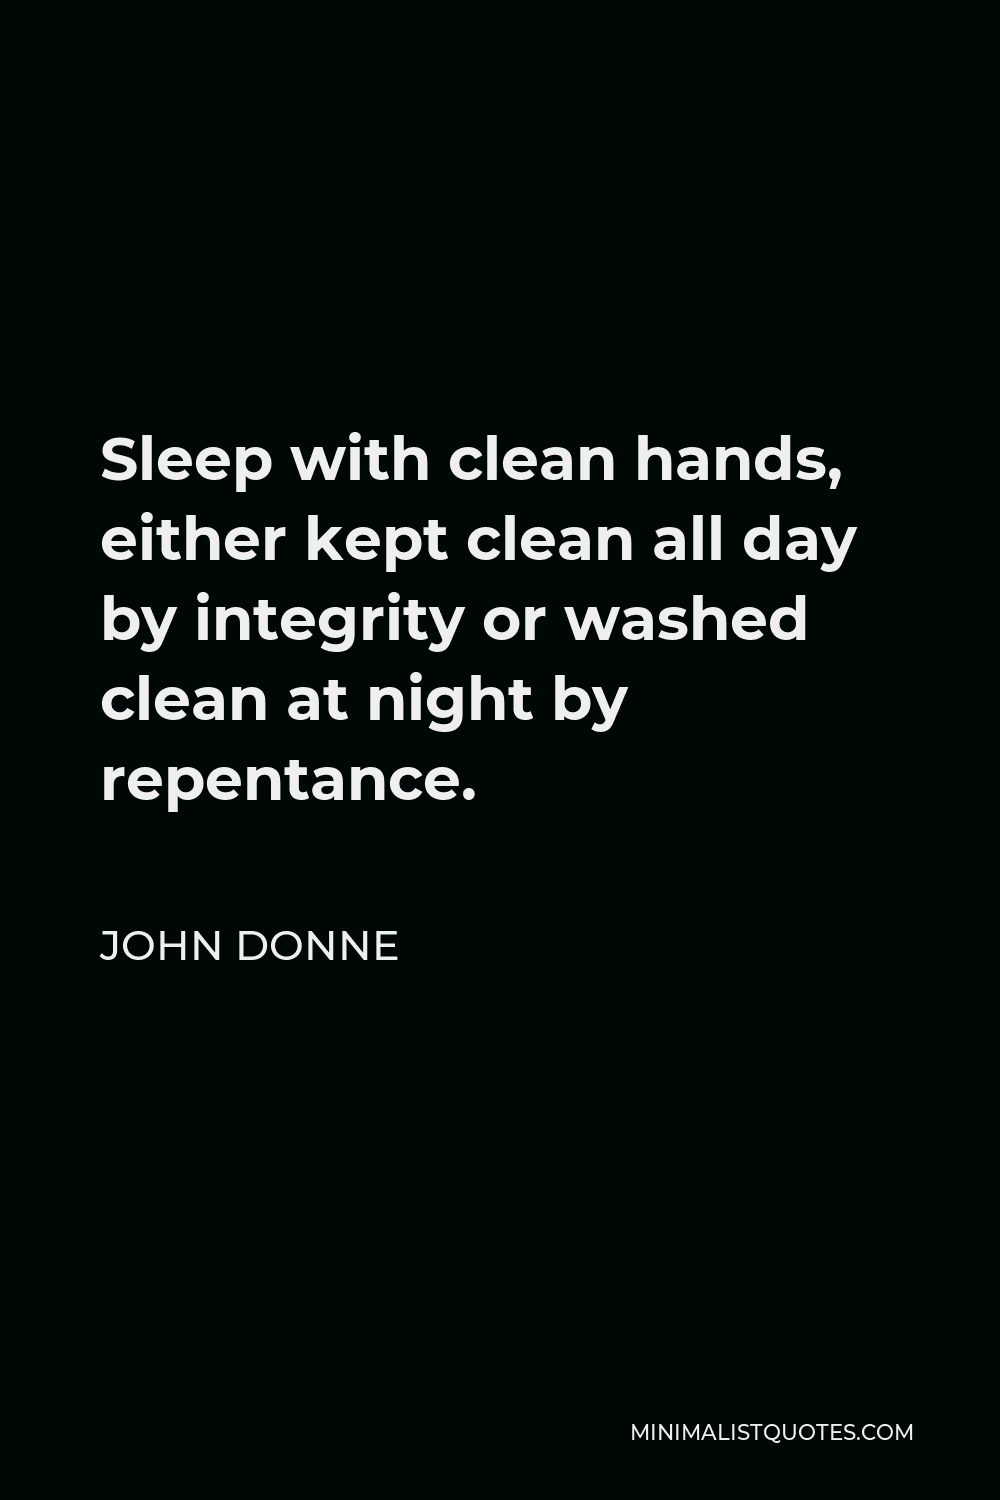 John Donne Quote - Sleep with clean hands, either kept clean all day by integrity or washed clean at night by repentance.